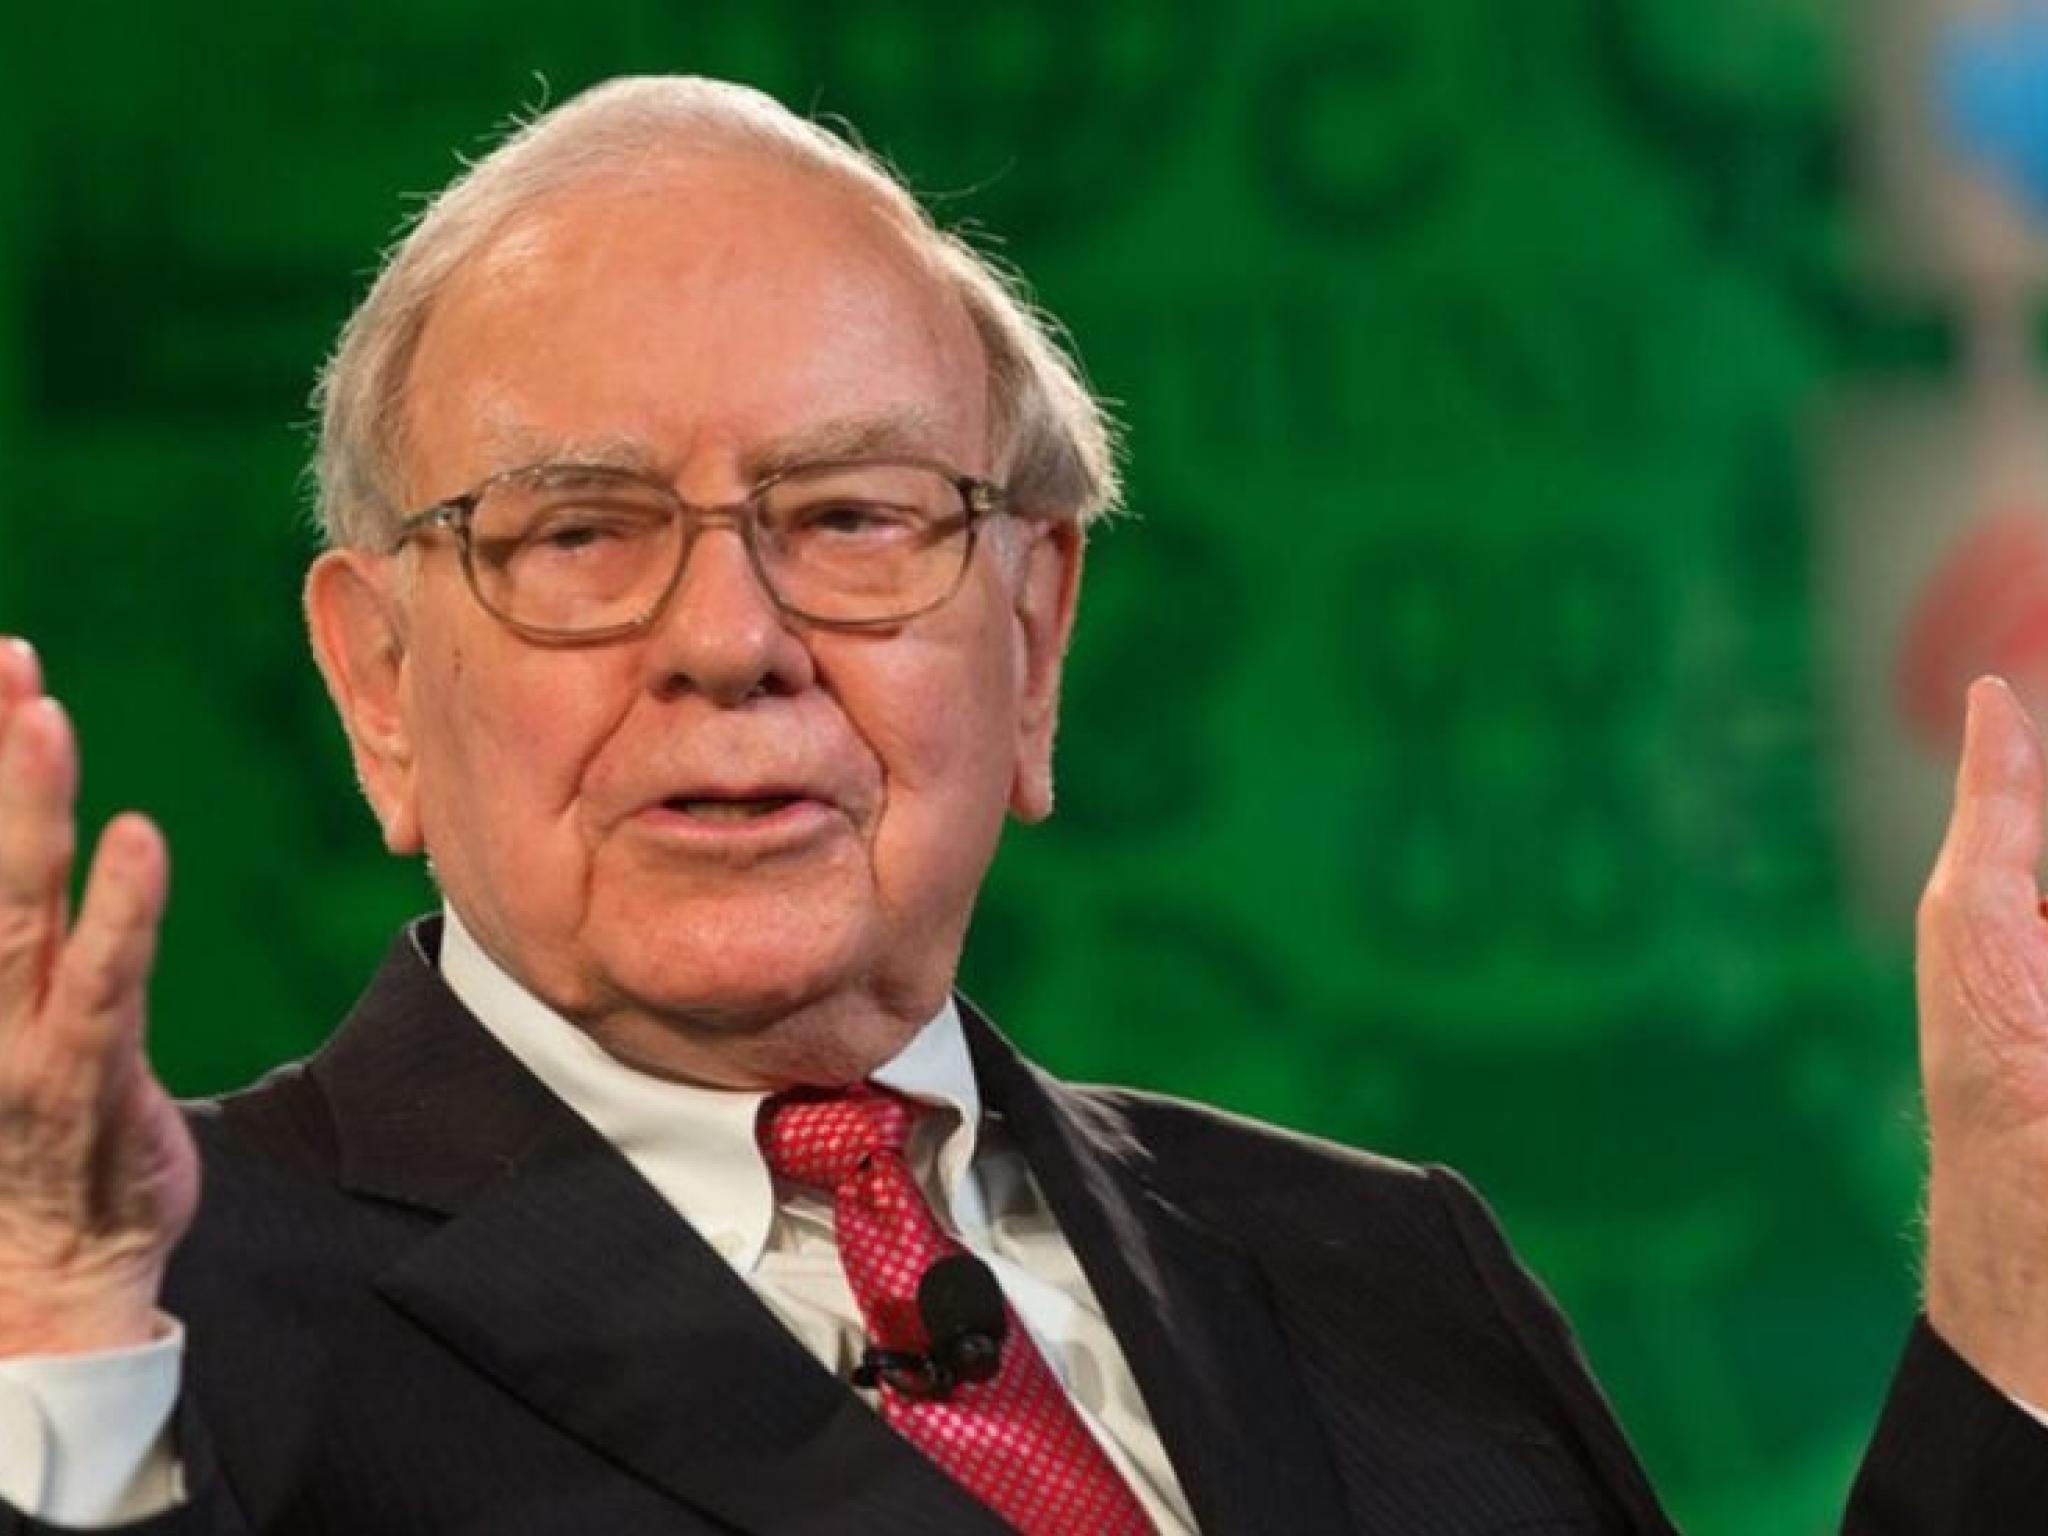  wanna-save-real-money-buffett-has-2-pieces-of-advice-for-cash-strapped-consumers 